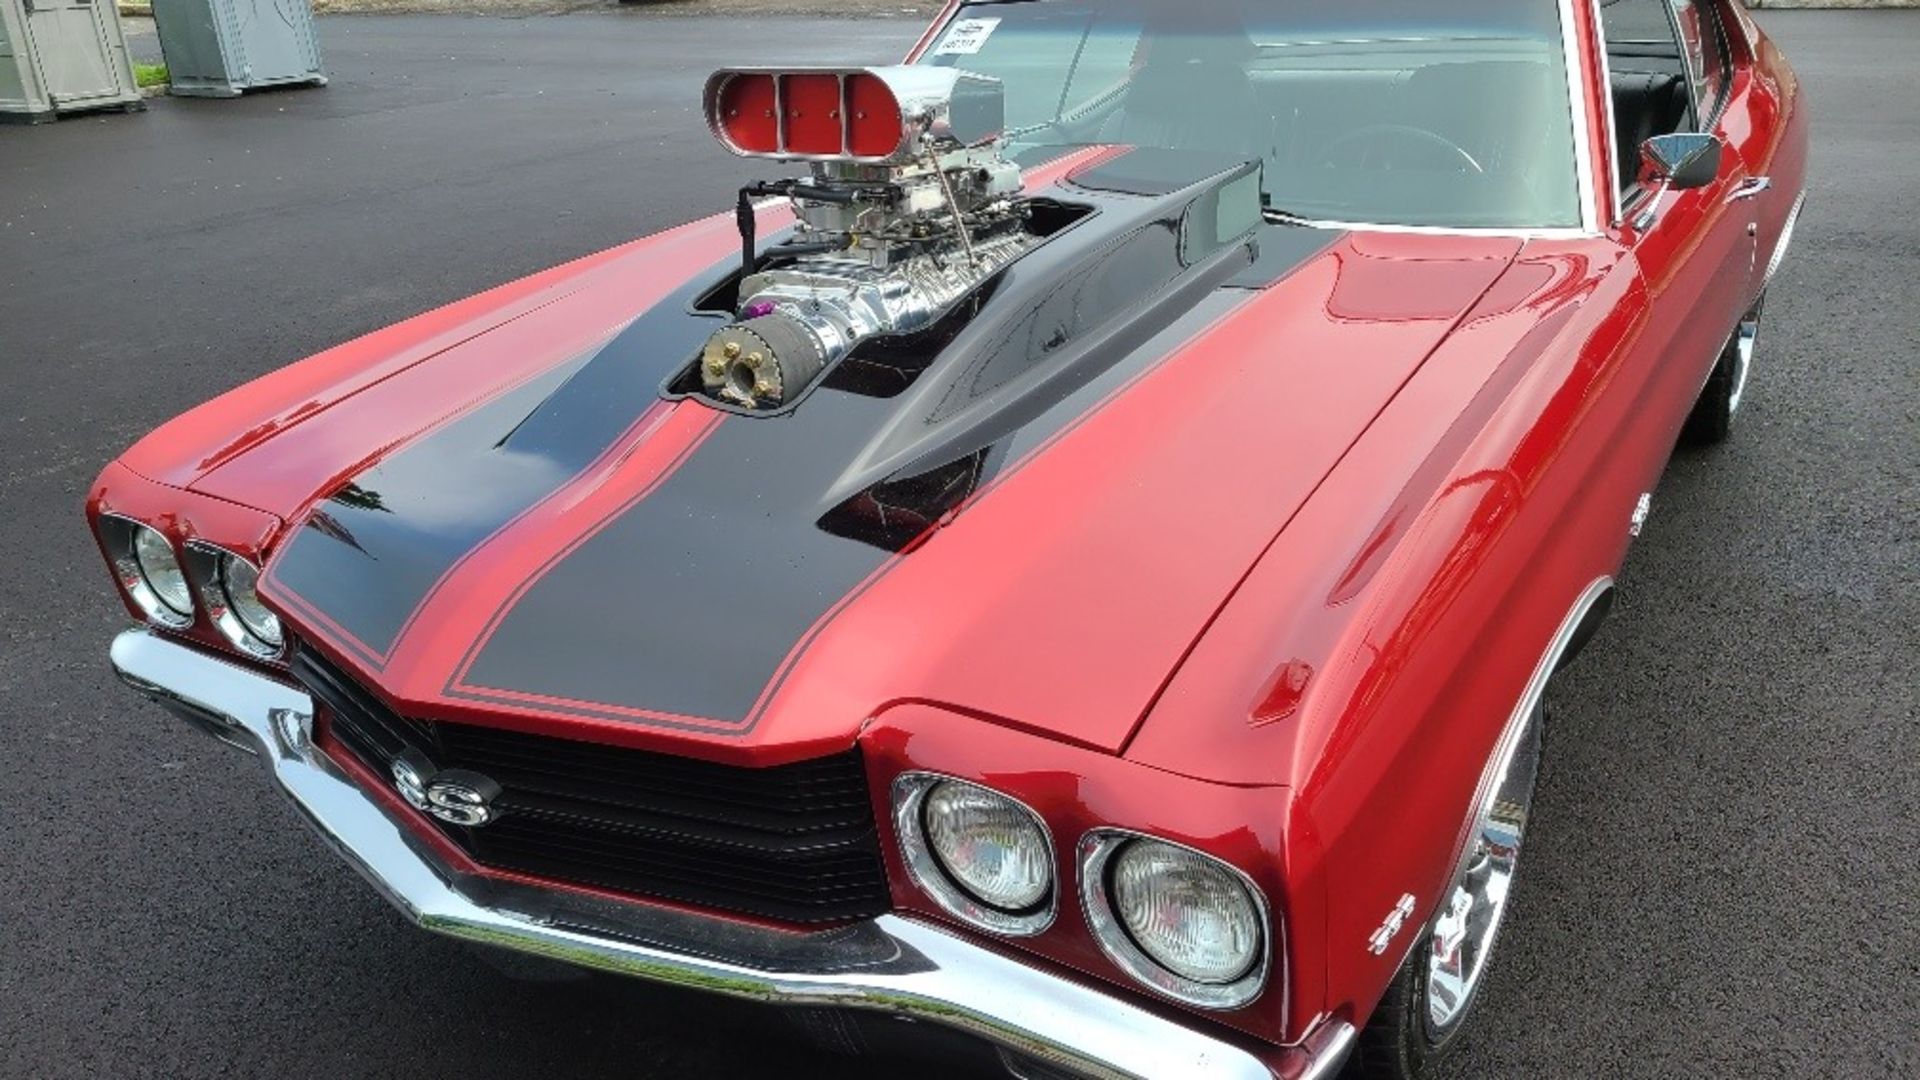 1970 Chevelle Ss - Image 14 of 18